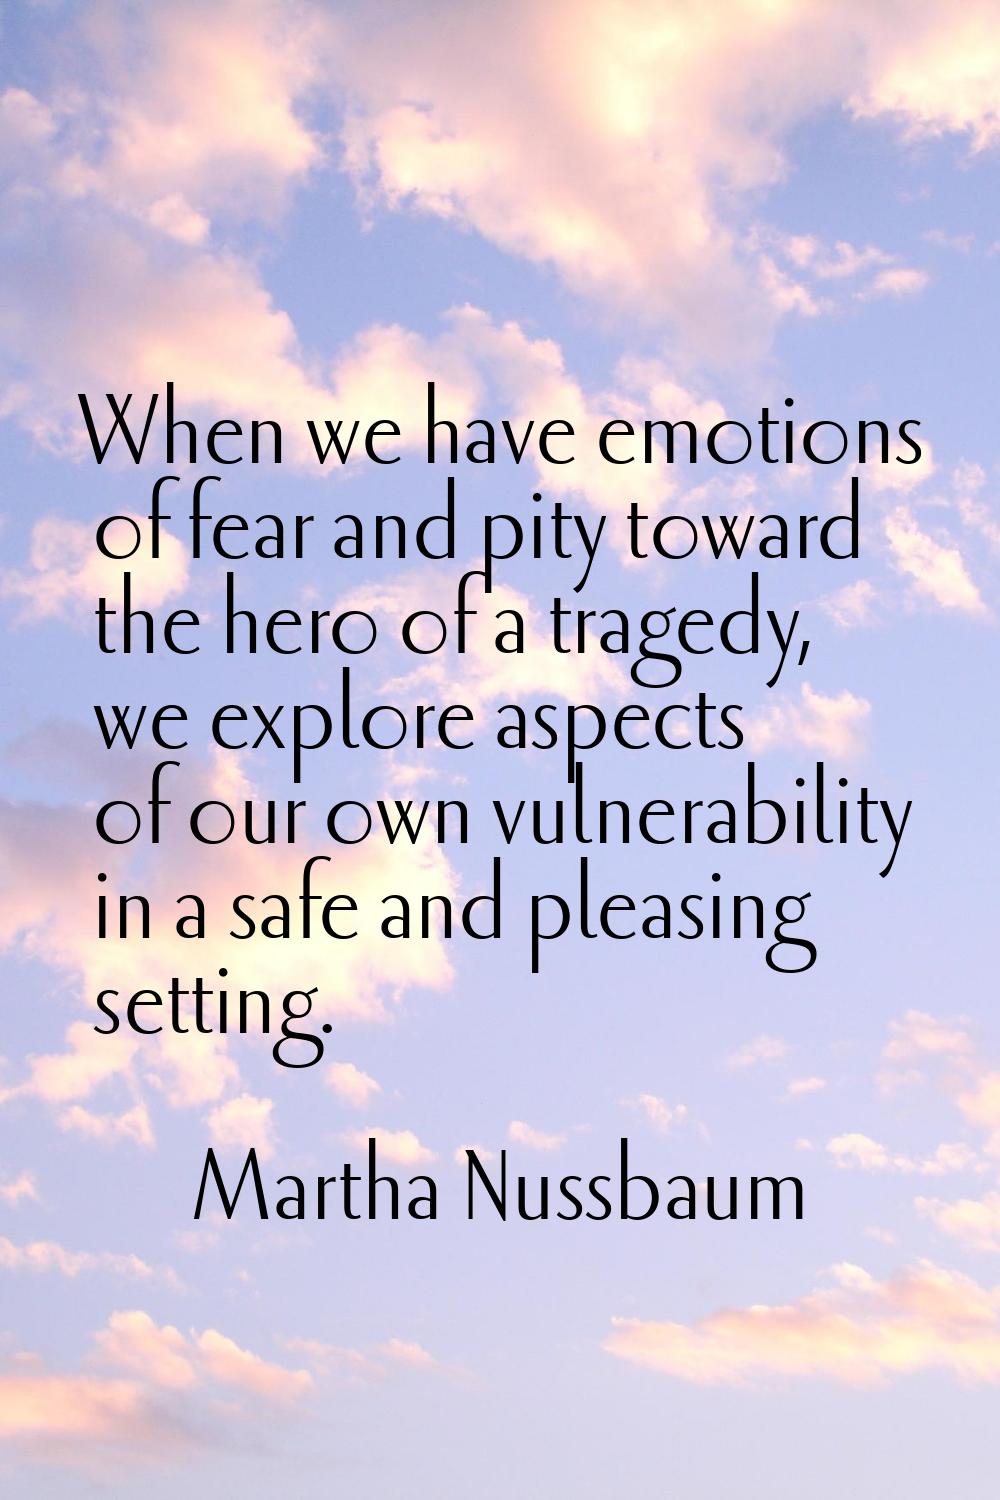 When we have emotions of fear and pity toward the hero of a tragedy, we explore aspects of our own 